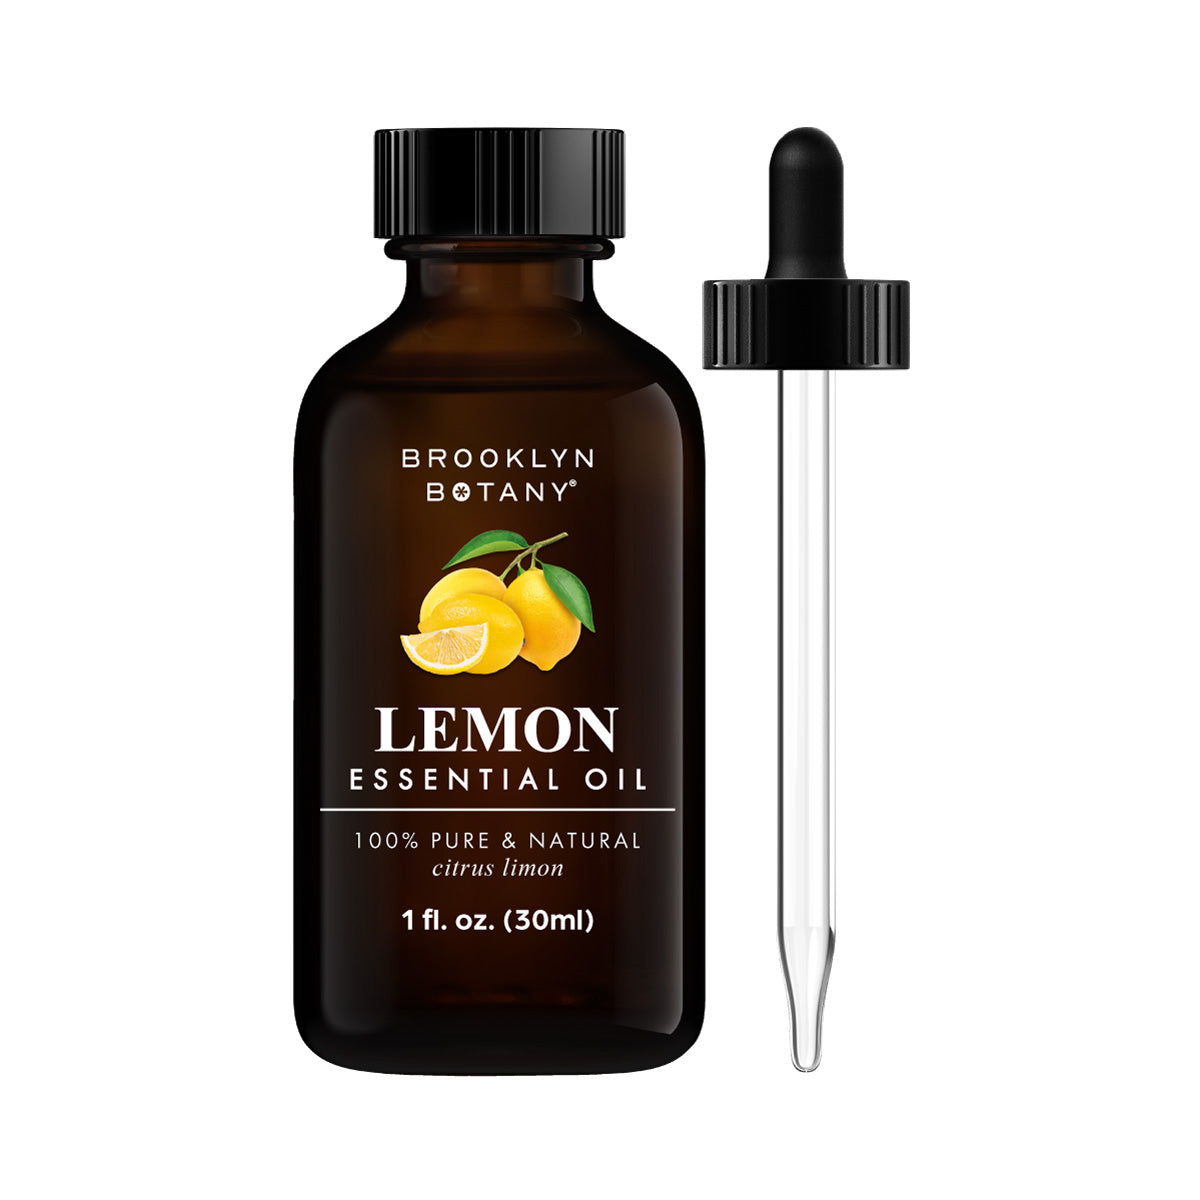 Shopify-BB-30ml-Lemon-Essential-Oil-Main-Image-with-Sides.jpg